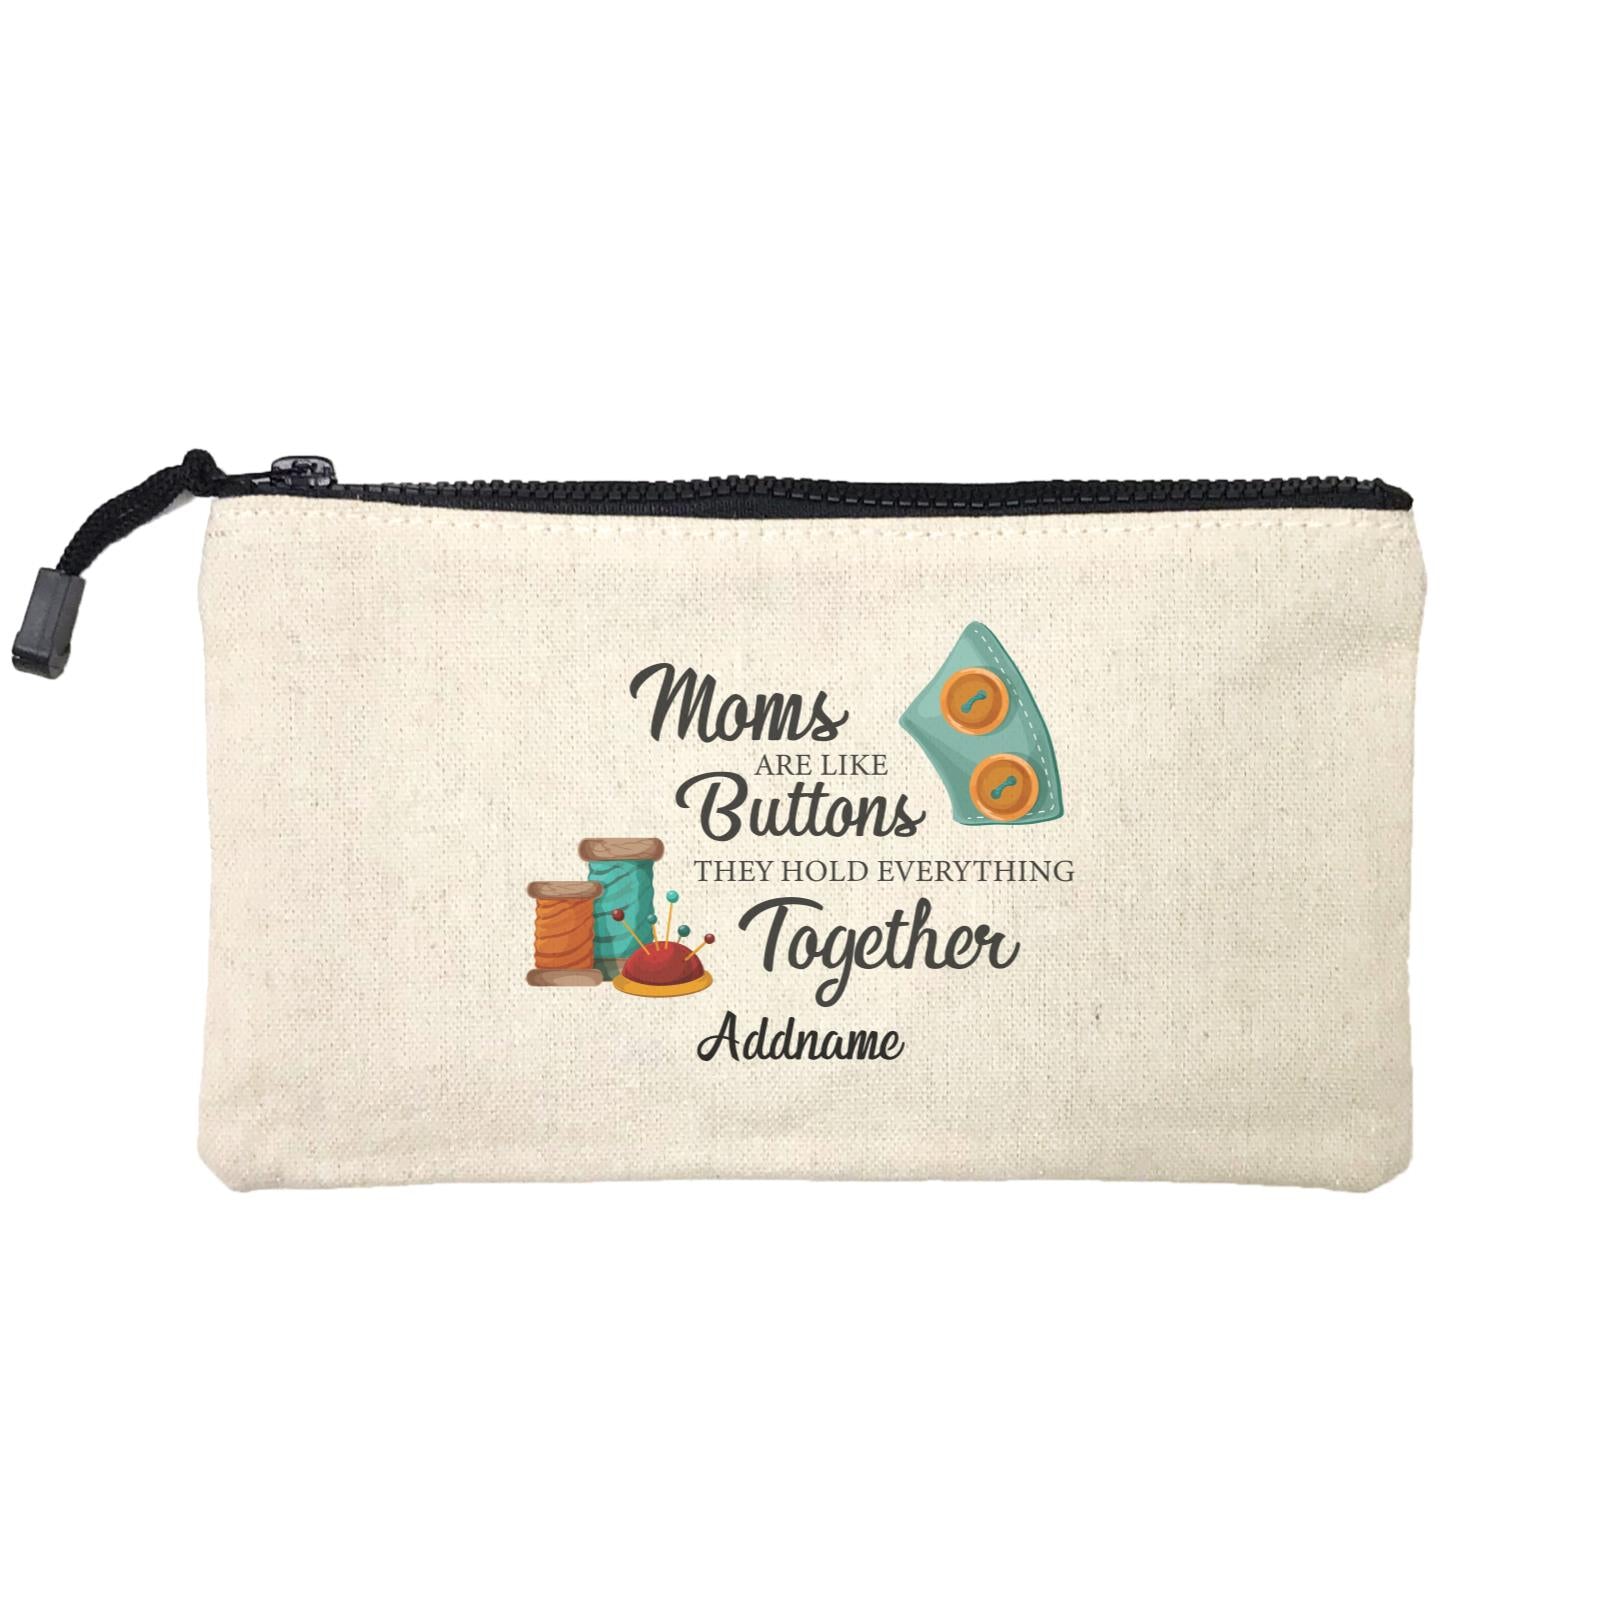 Sweet Mom Quotes 2 Moms Are Like Buttons They Hold Everything Together Addname Mini Accessories Stationery Pouch